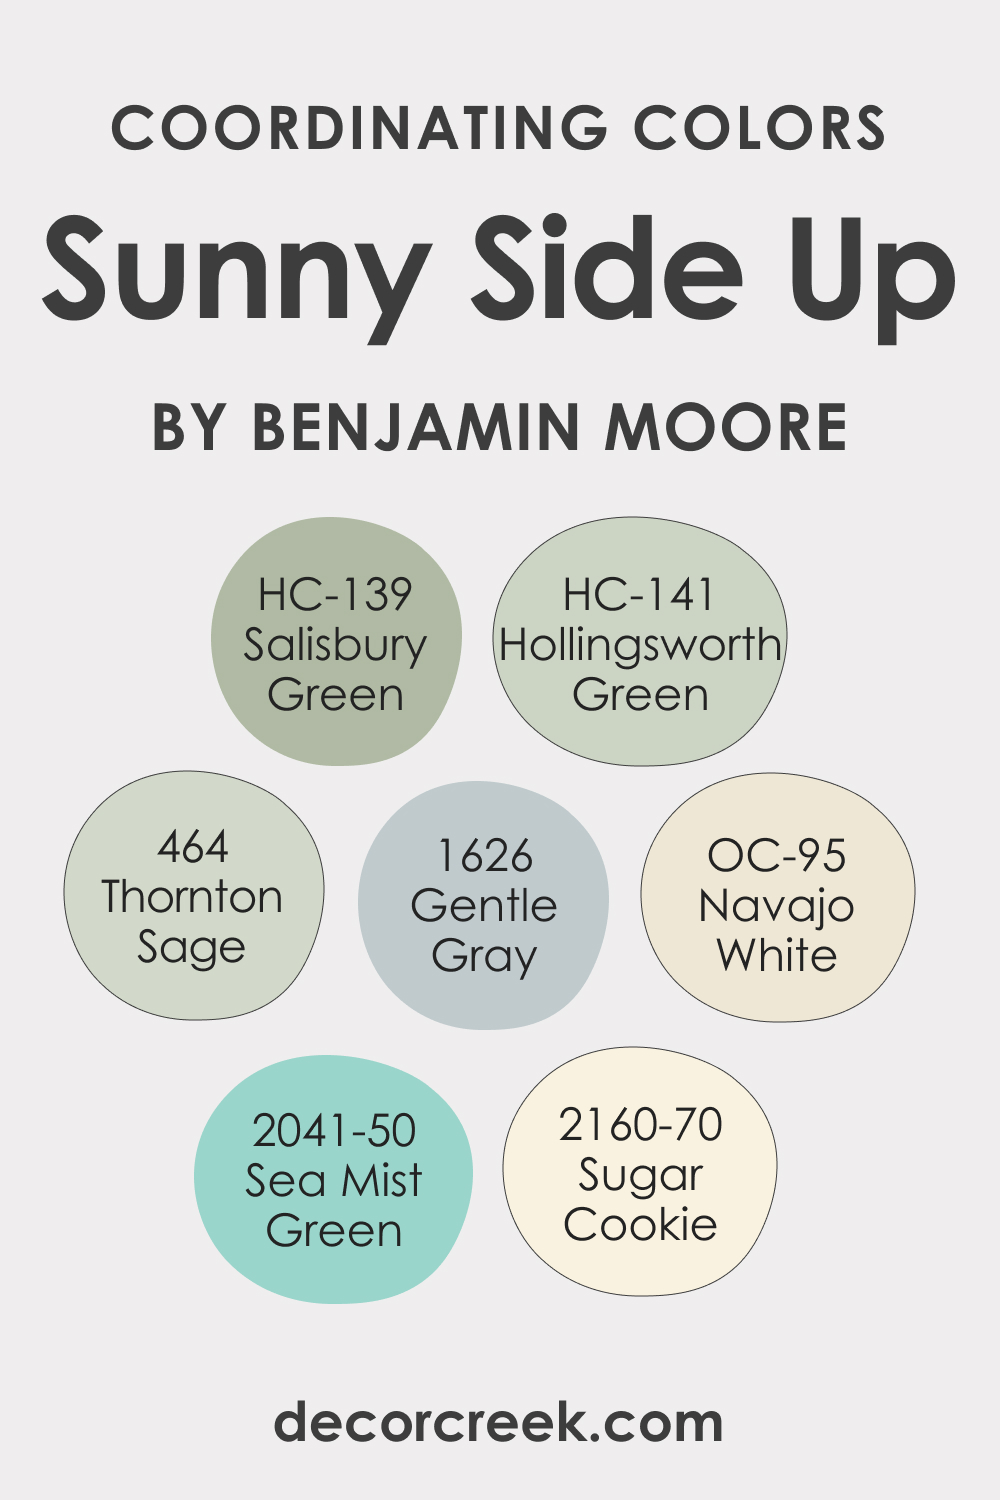 Coordinating Colors of Sunny Side Up 367